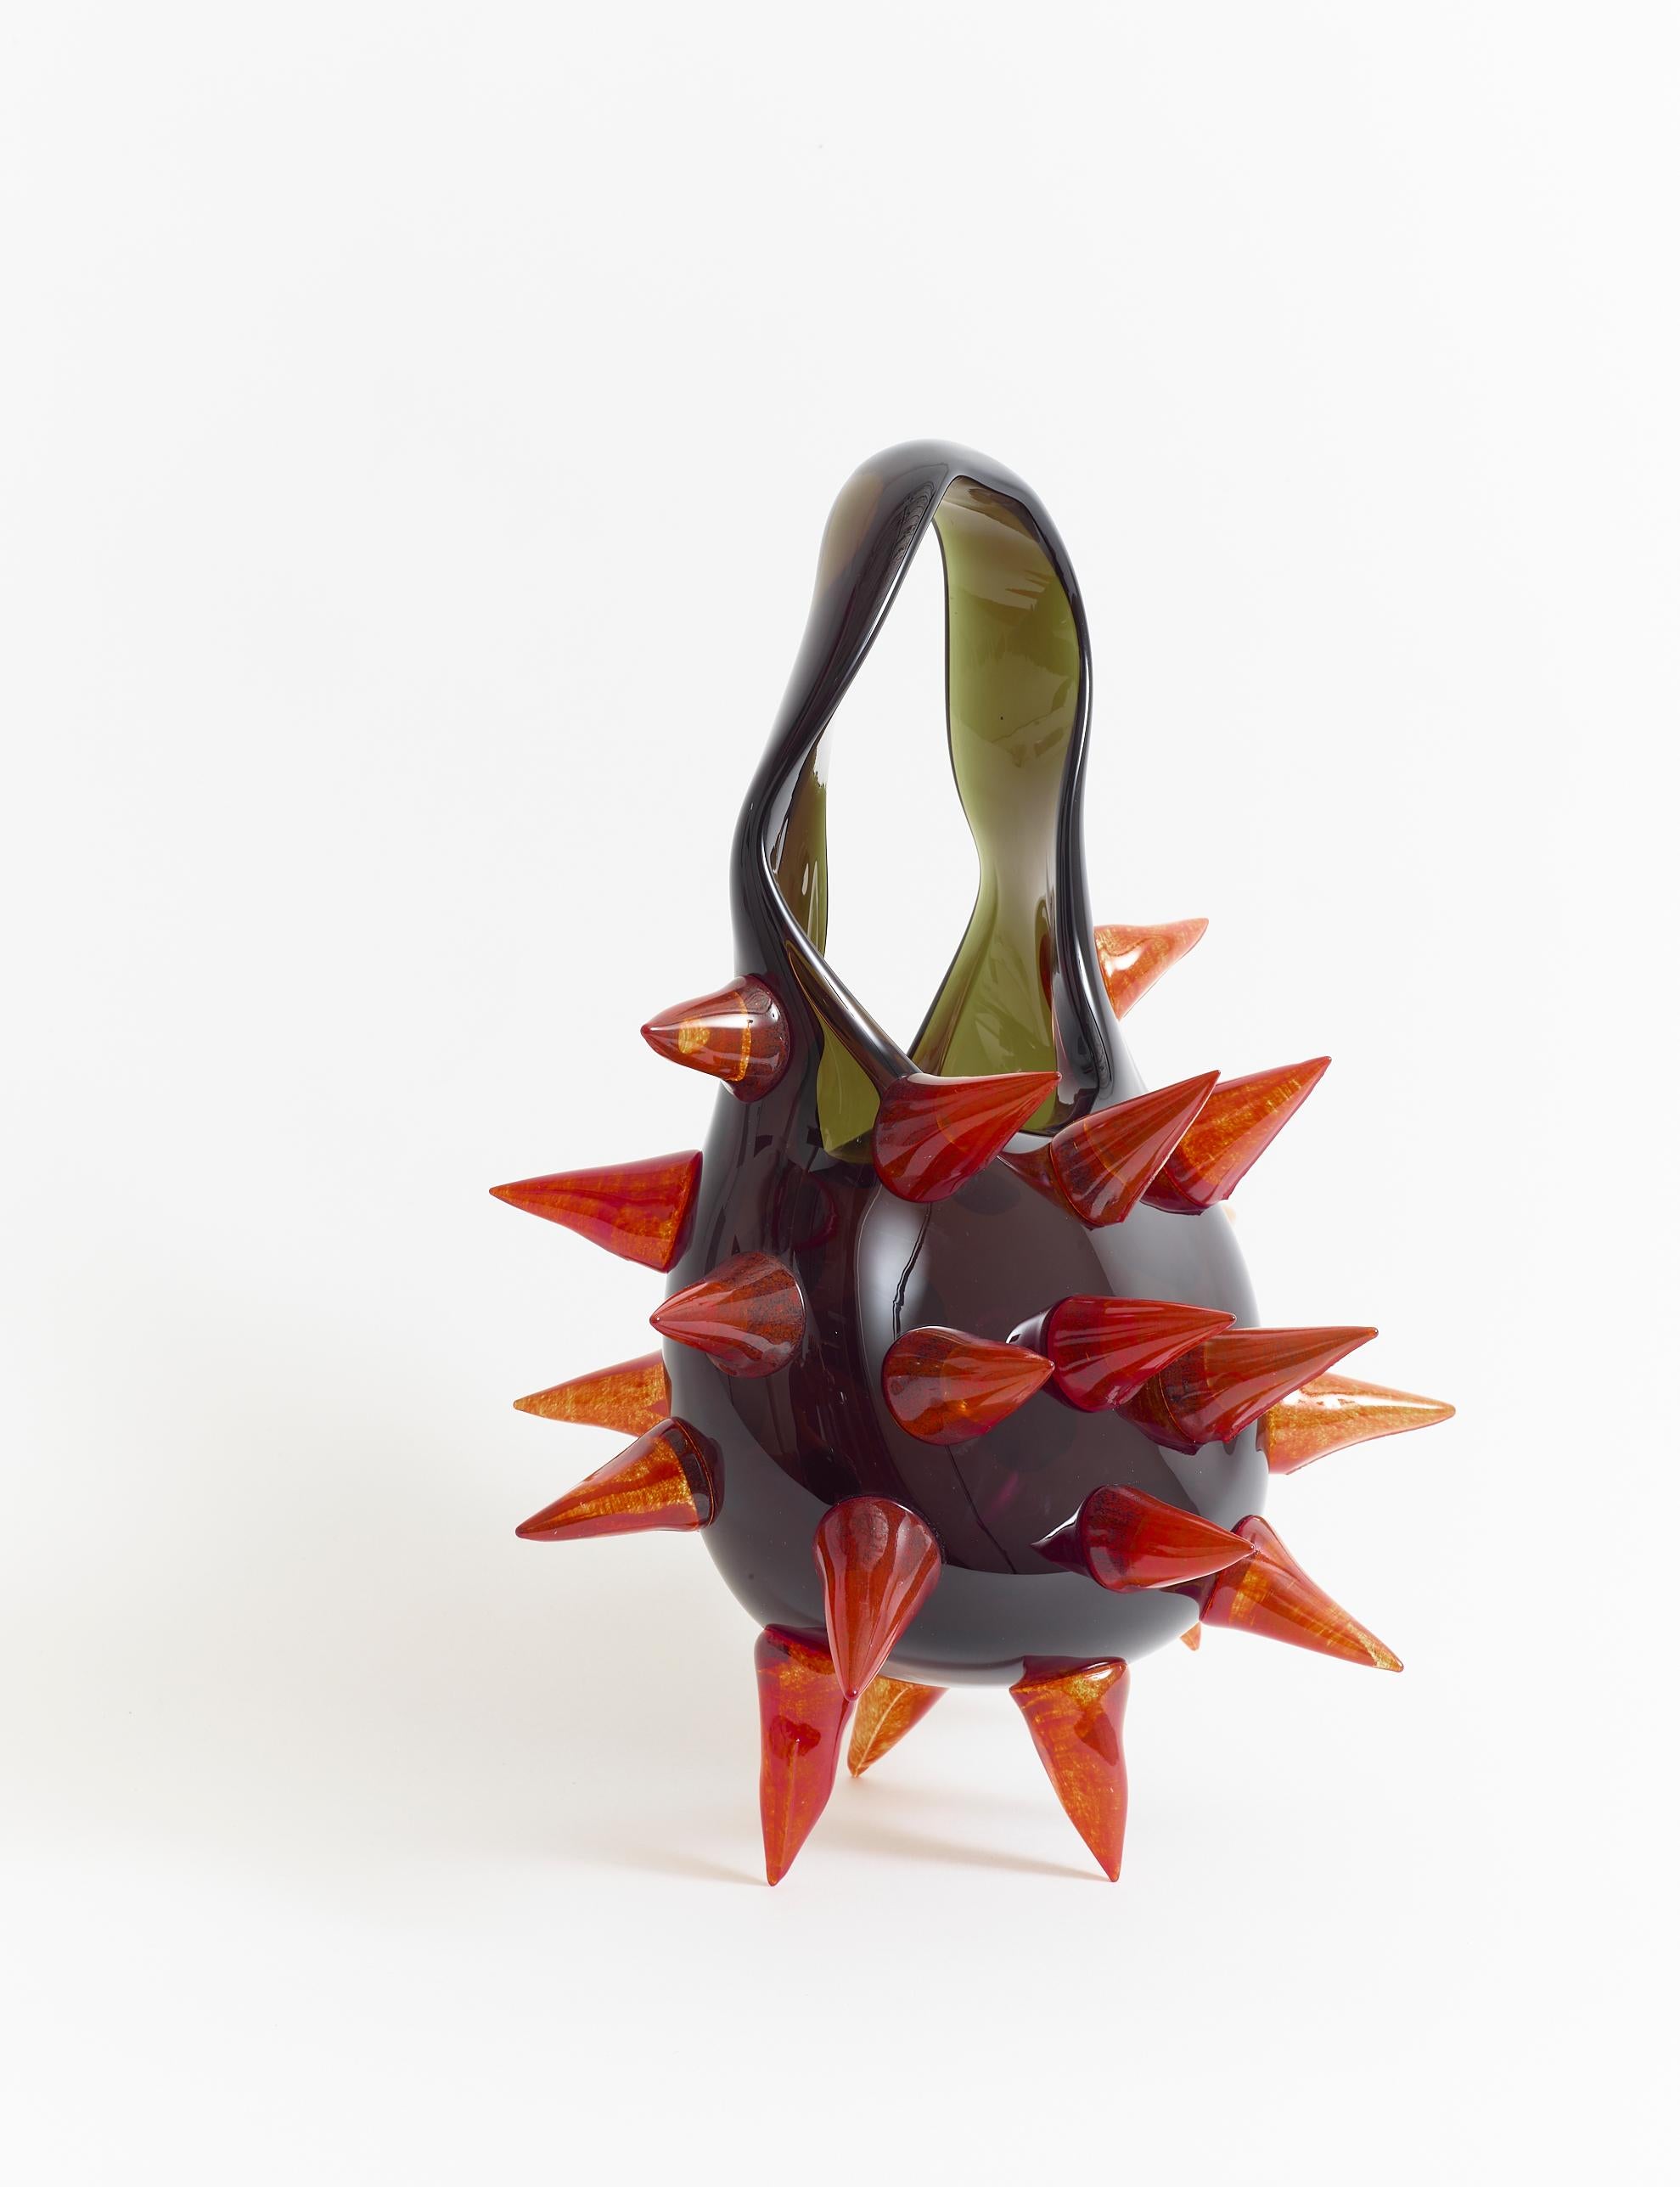 Other Glass Handbag with Red Spikes by Raiffe For Sale